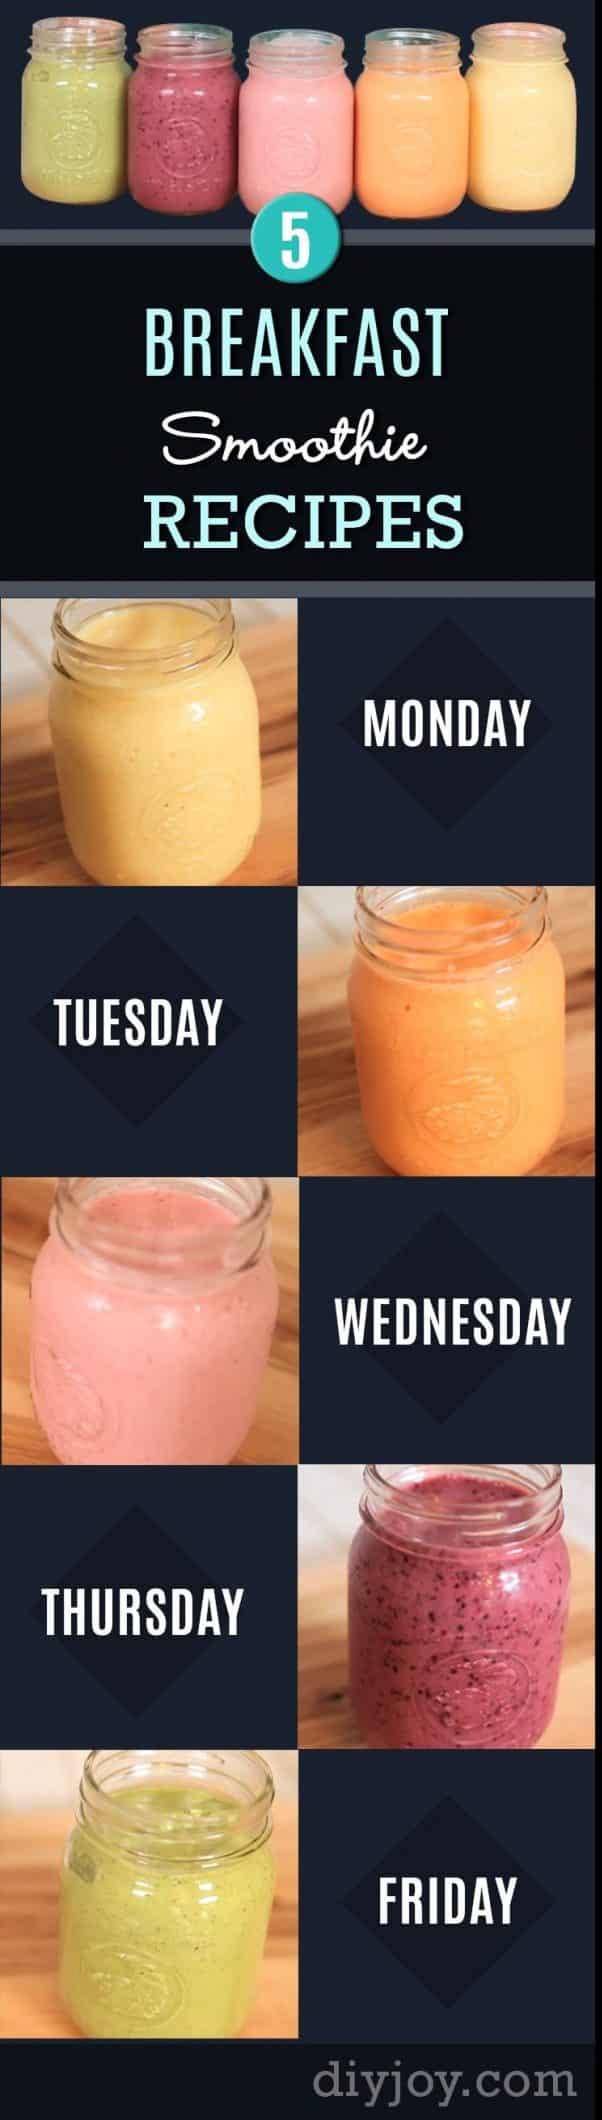 Healthy smoothie recipes and easy ideas perfect for breakfast, energy. Low calorie and high protein recipes for weightloss and to lose weight. Simple homemade recipe ideas that kids love. | Monday To Friday – 5 Ultimate Breakfast Smoothie Recipes!